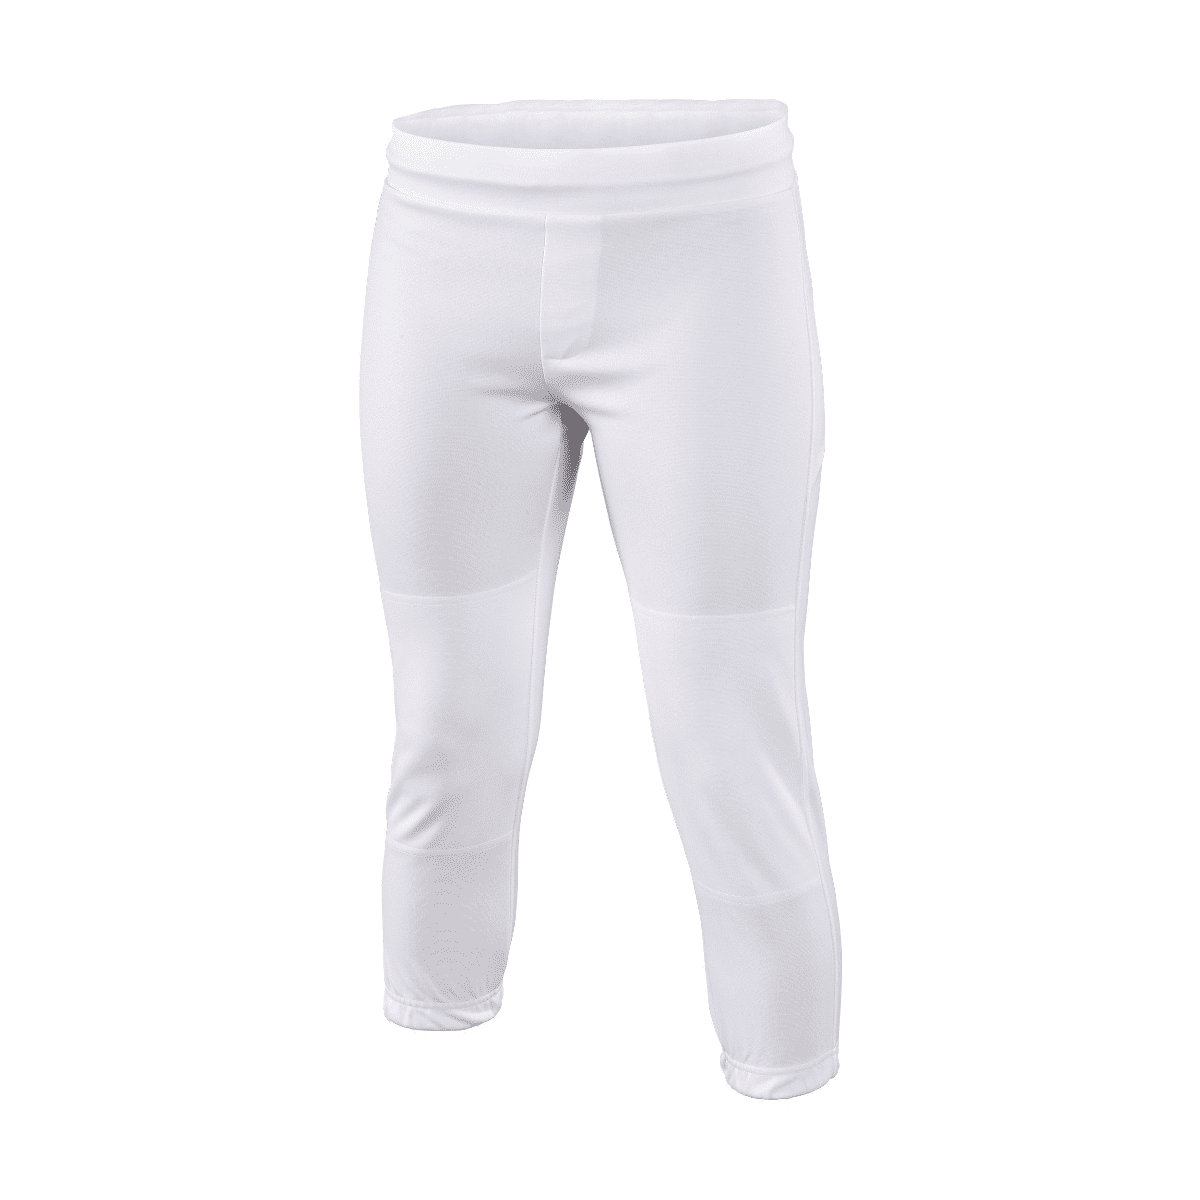 Solid EASTON PROWESS Fastpitch Game/Practice Softball Pant Women's